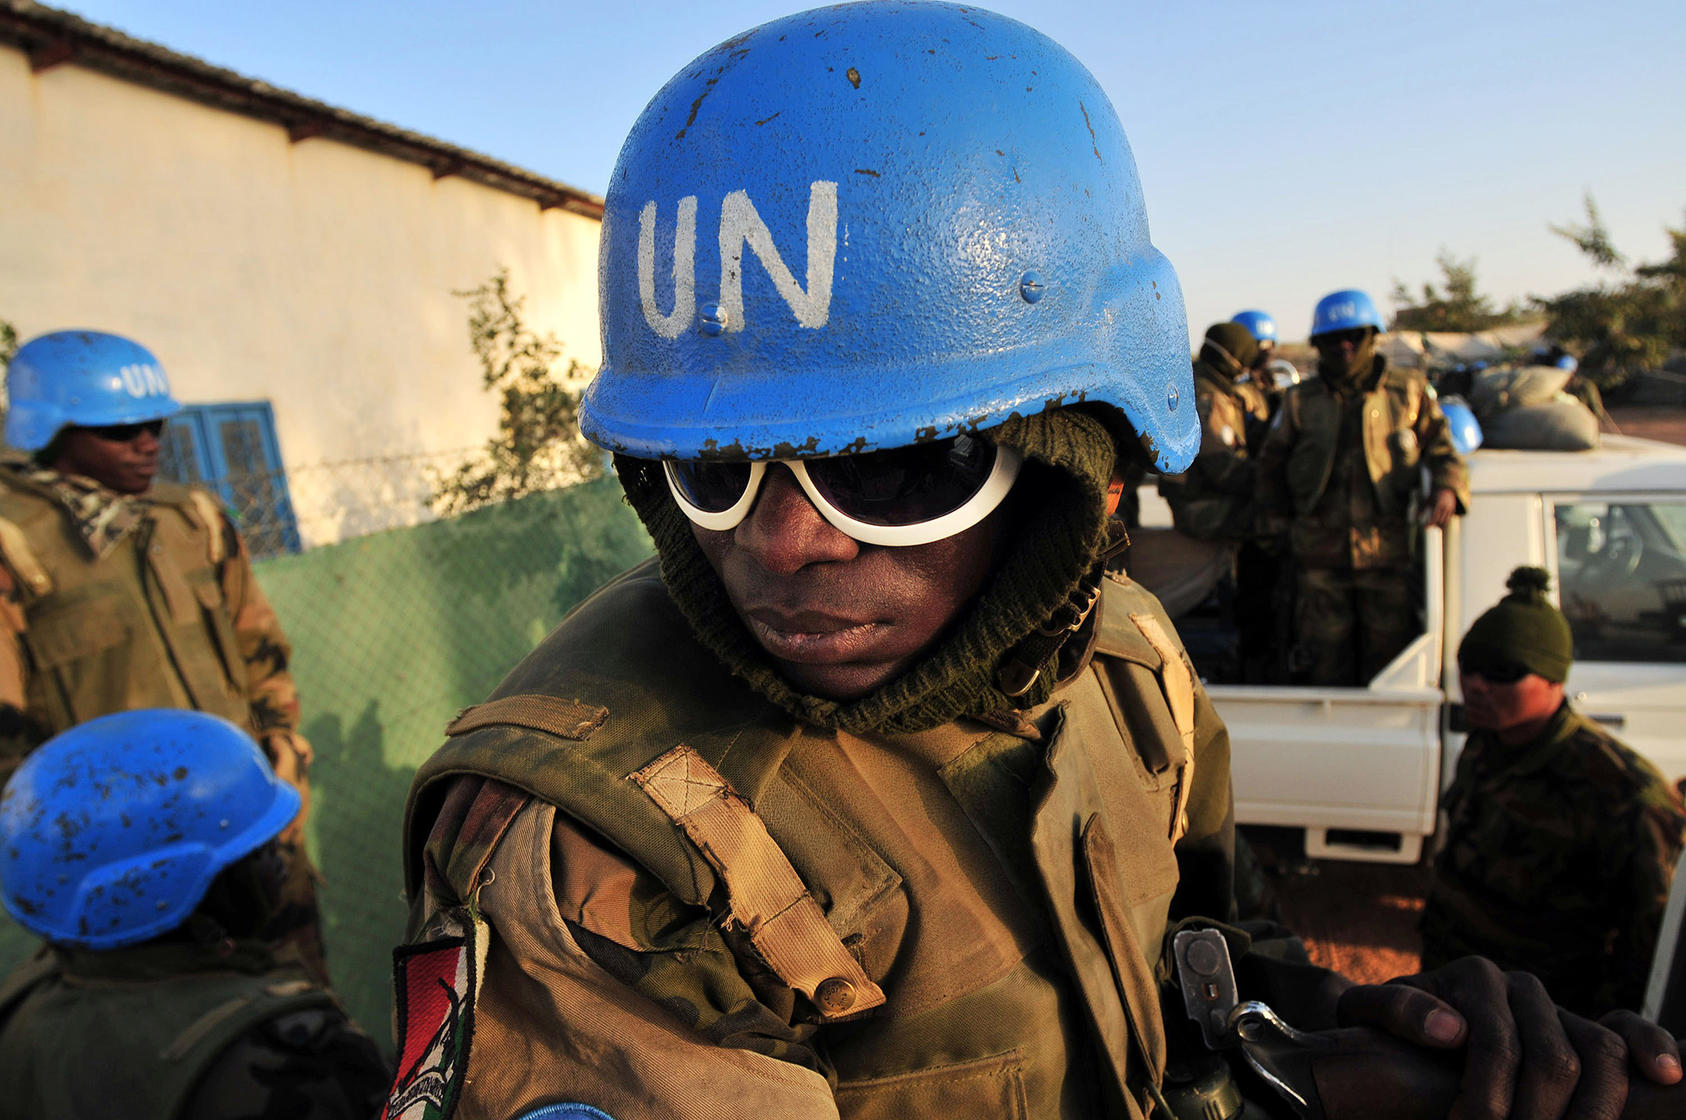 Nigerian soldiers with the United Nations peacekeeping force in Darfur prepare to head out on patrol from their base in El Geneina, Sudan, on Feb. 26, 2008. (Lynsey Addario/The New York Times)